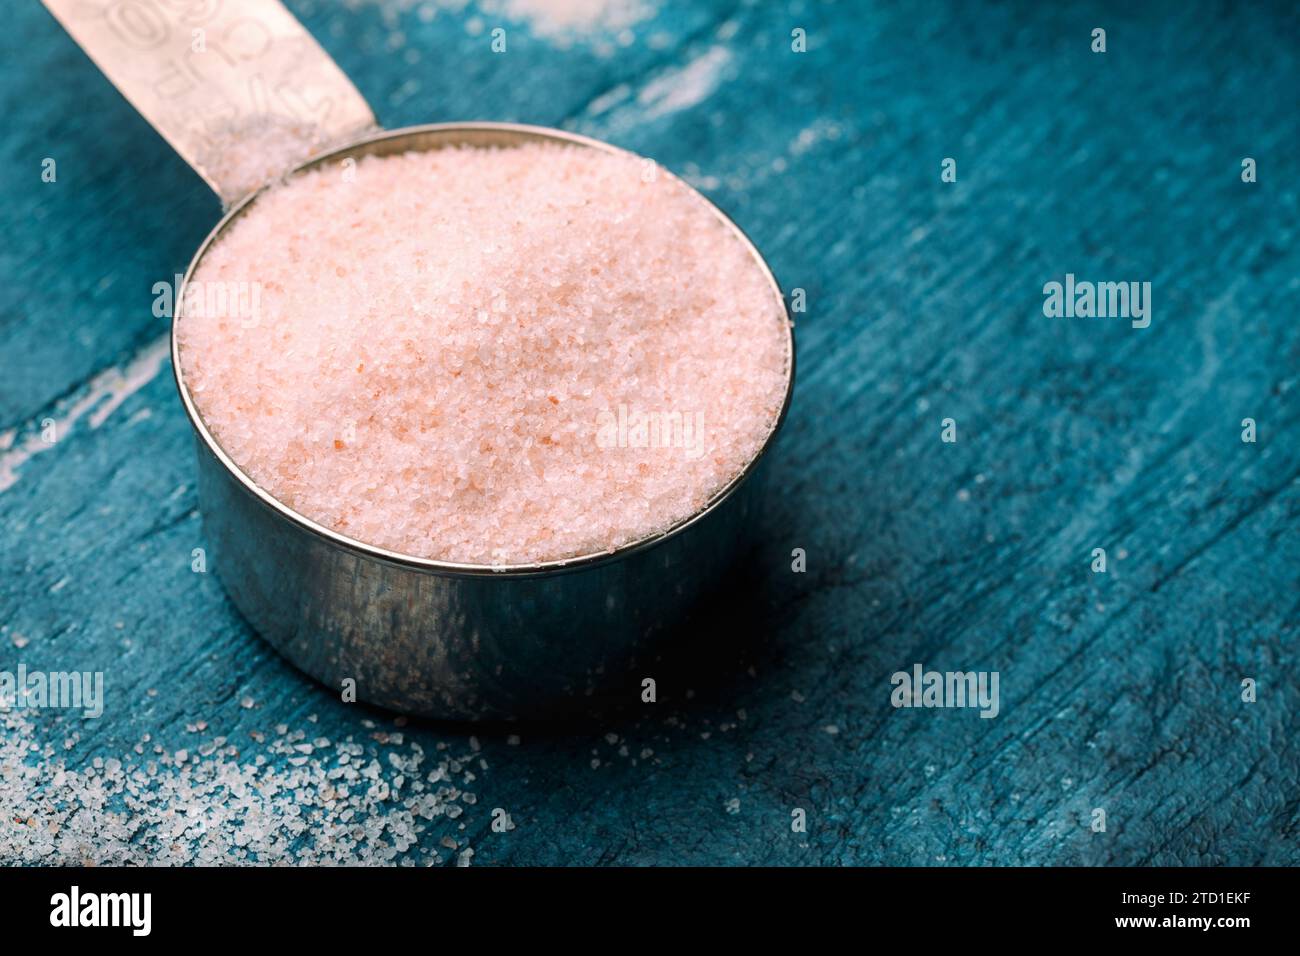 Pink Himalayan salt in measuring spoon on wooden background. Stock Photo